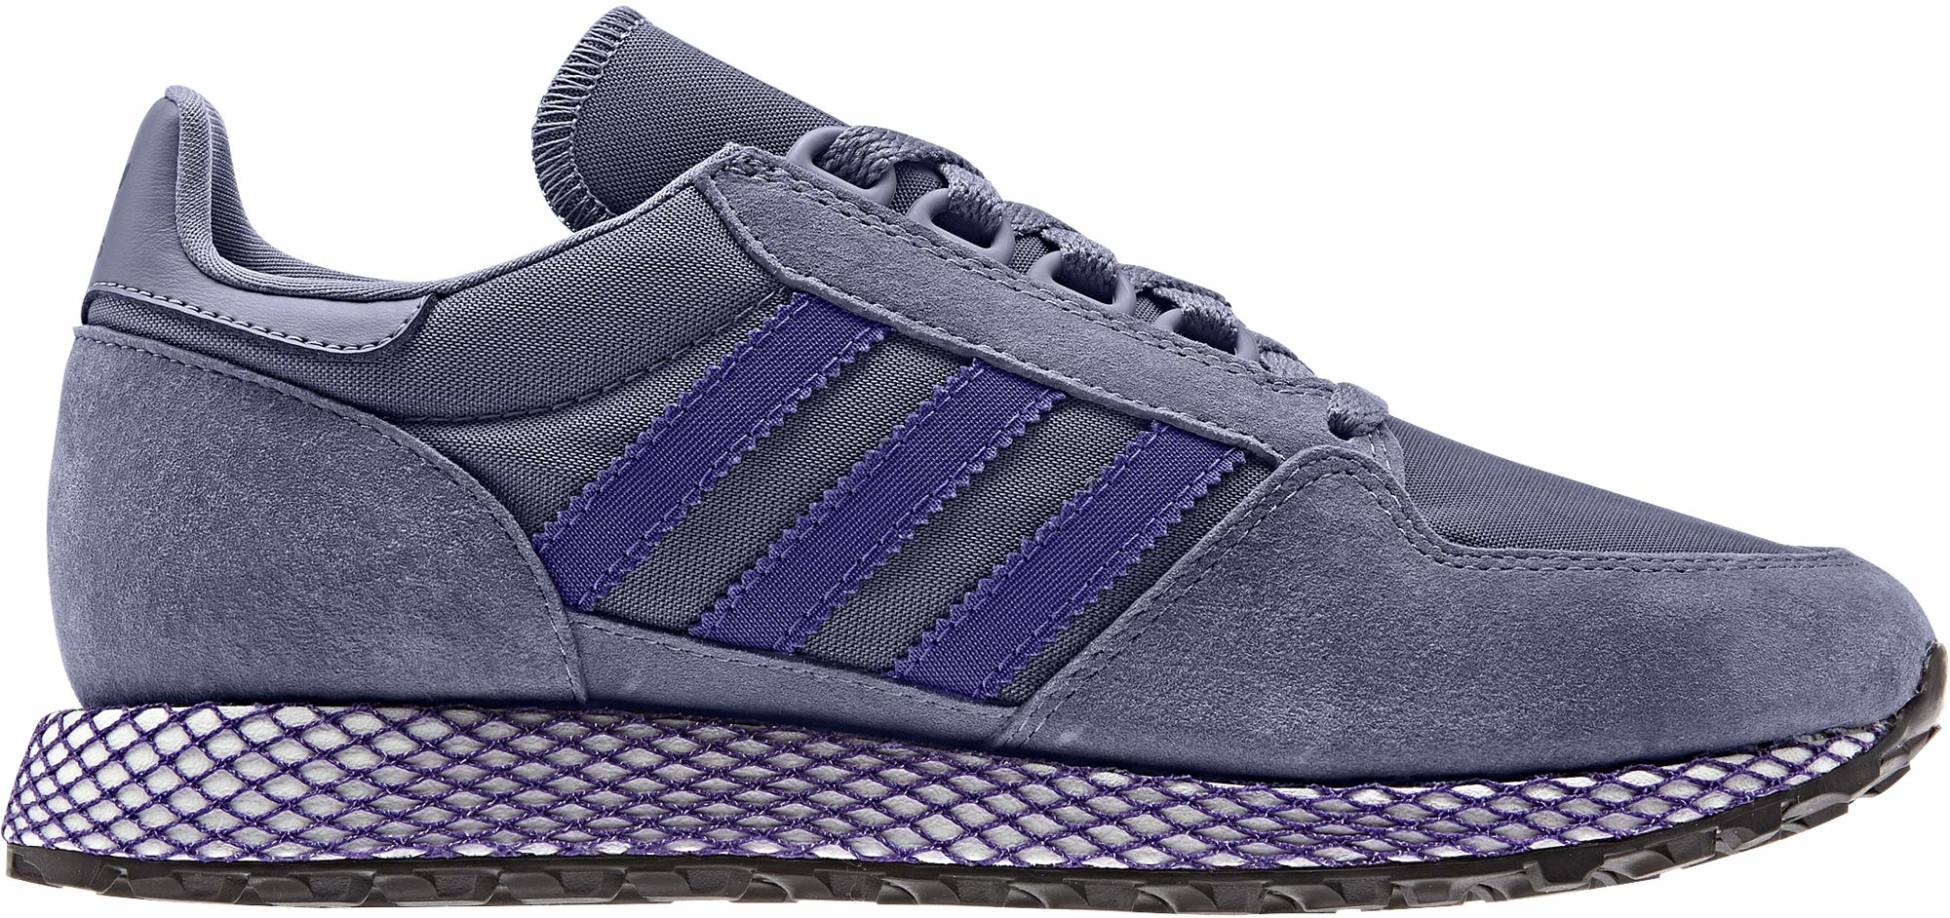 Adidas Forest Grove sneakers in 10 colors (only $50) | RunRepeat